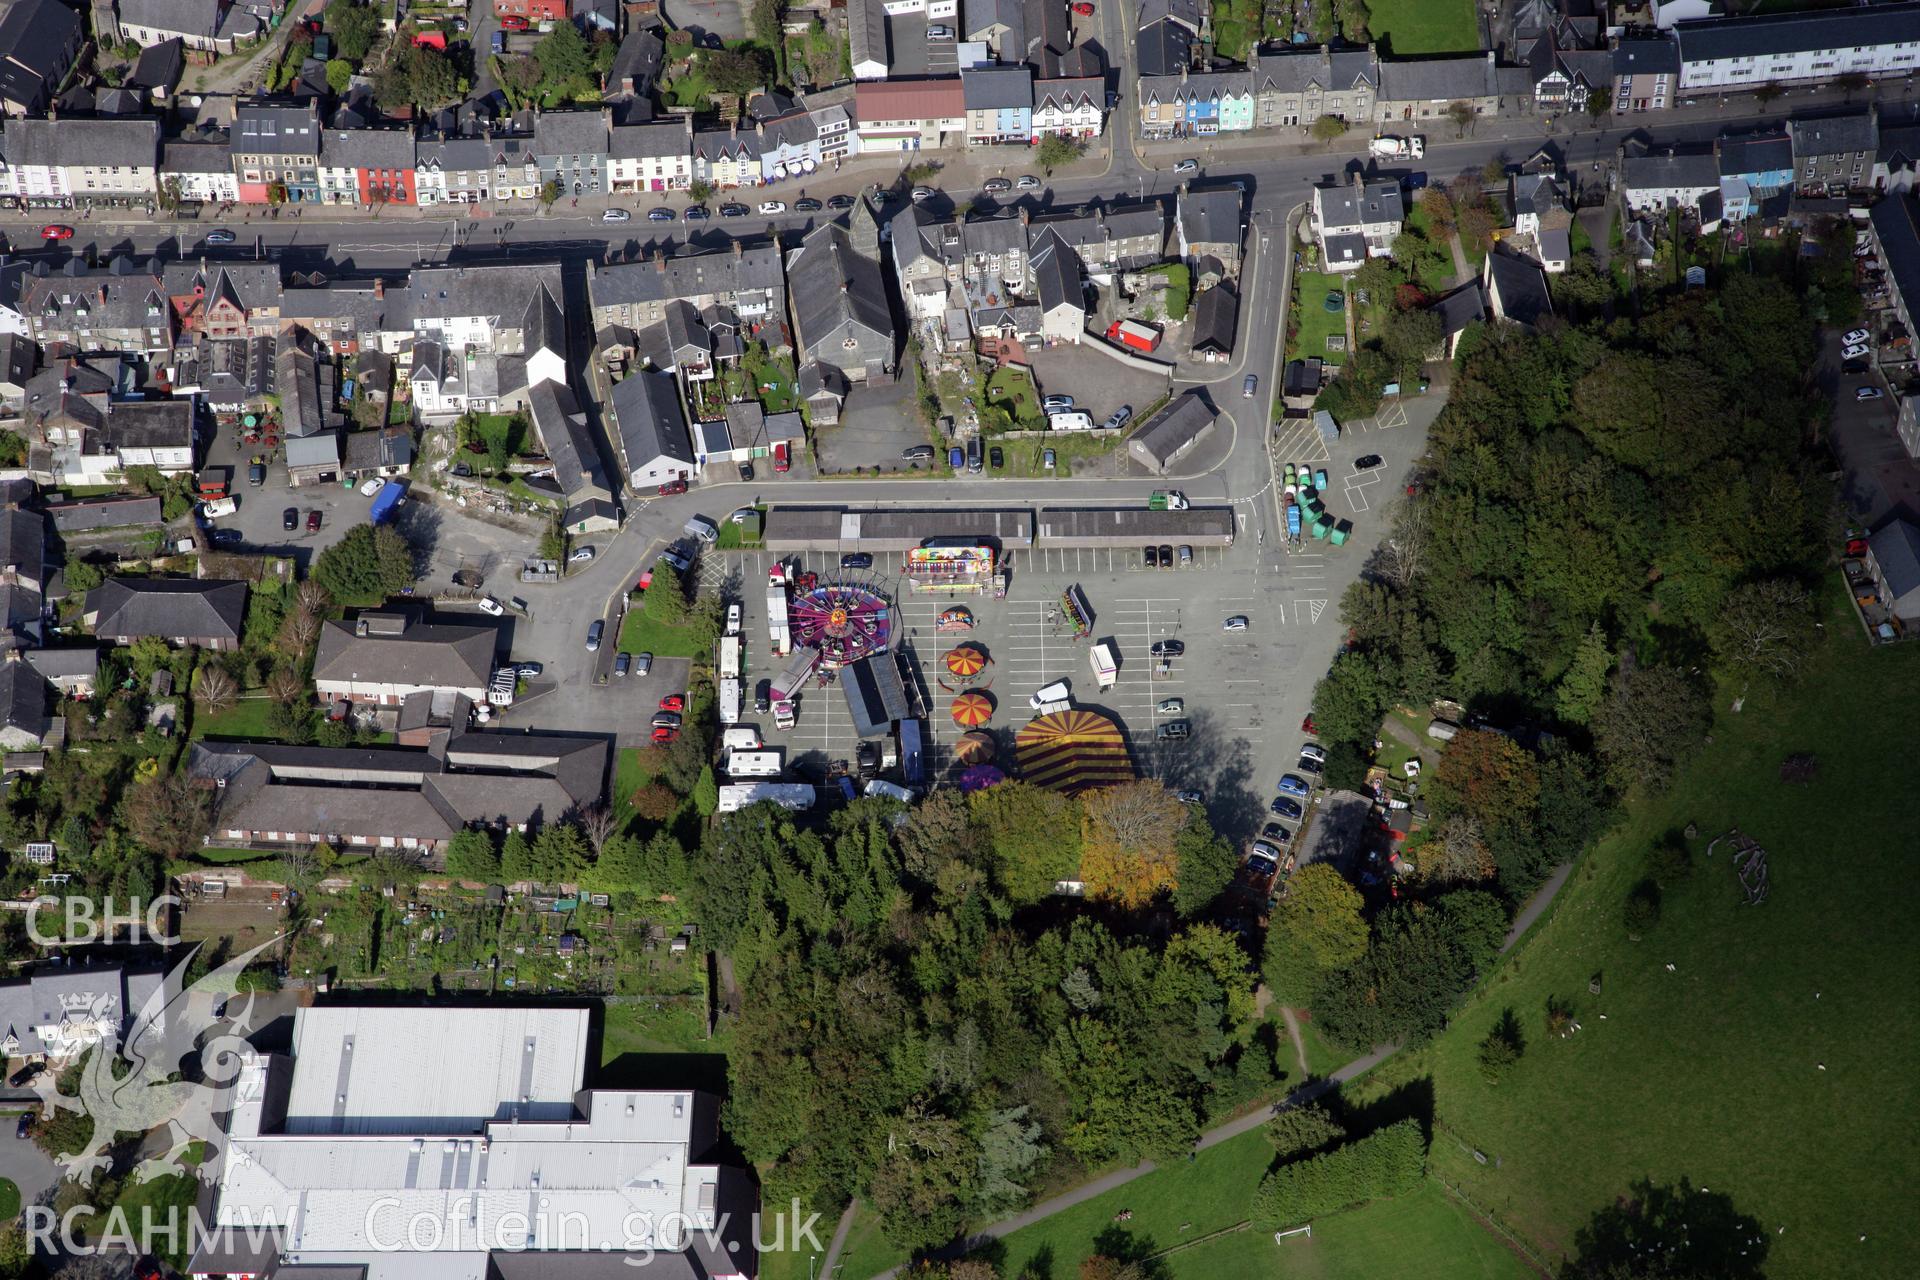 RCAHMW colour oblique photograph of View of Machynlleth, car park centre, Maengwyn Street top of photo. Taken by Oliver Davies on 29/09/2011.